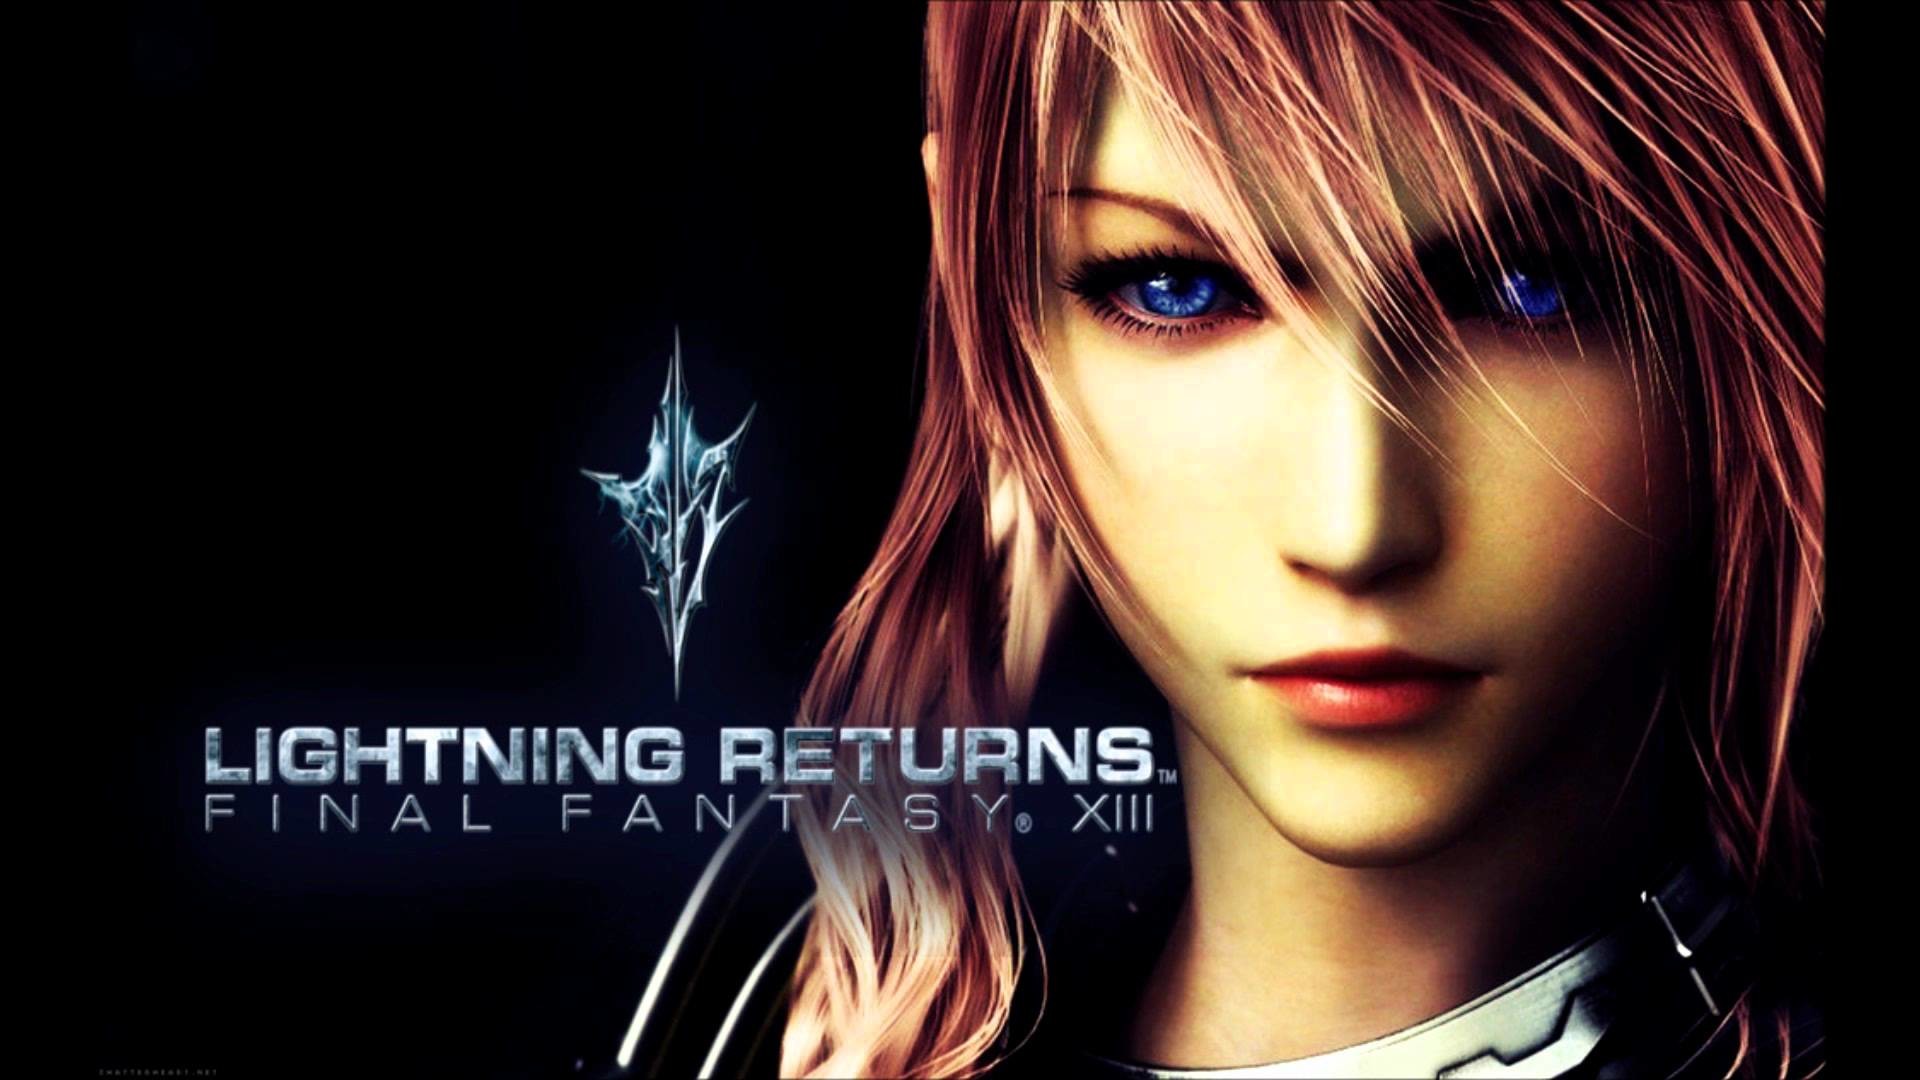 1920x1080 Lightning Returns: Final Fantasy XIII. (Dust To Dust) OST Wanted Theme. -  YouTube